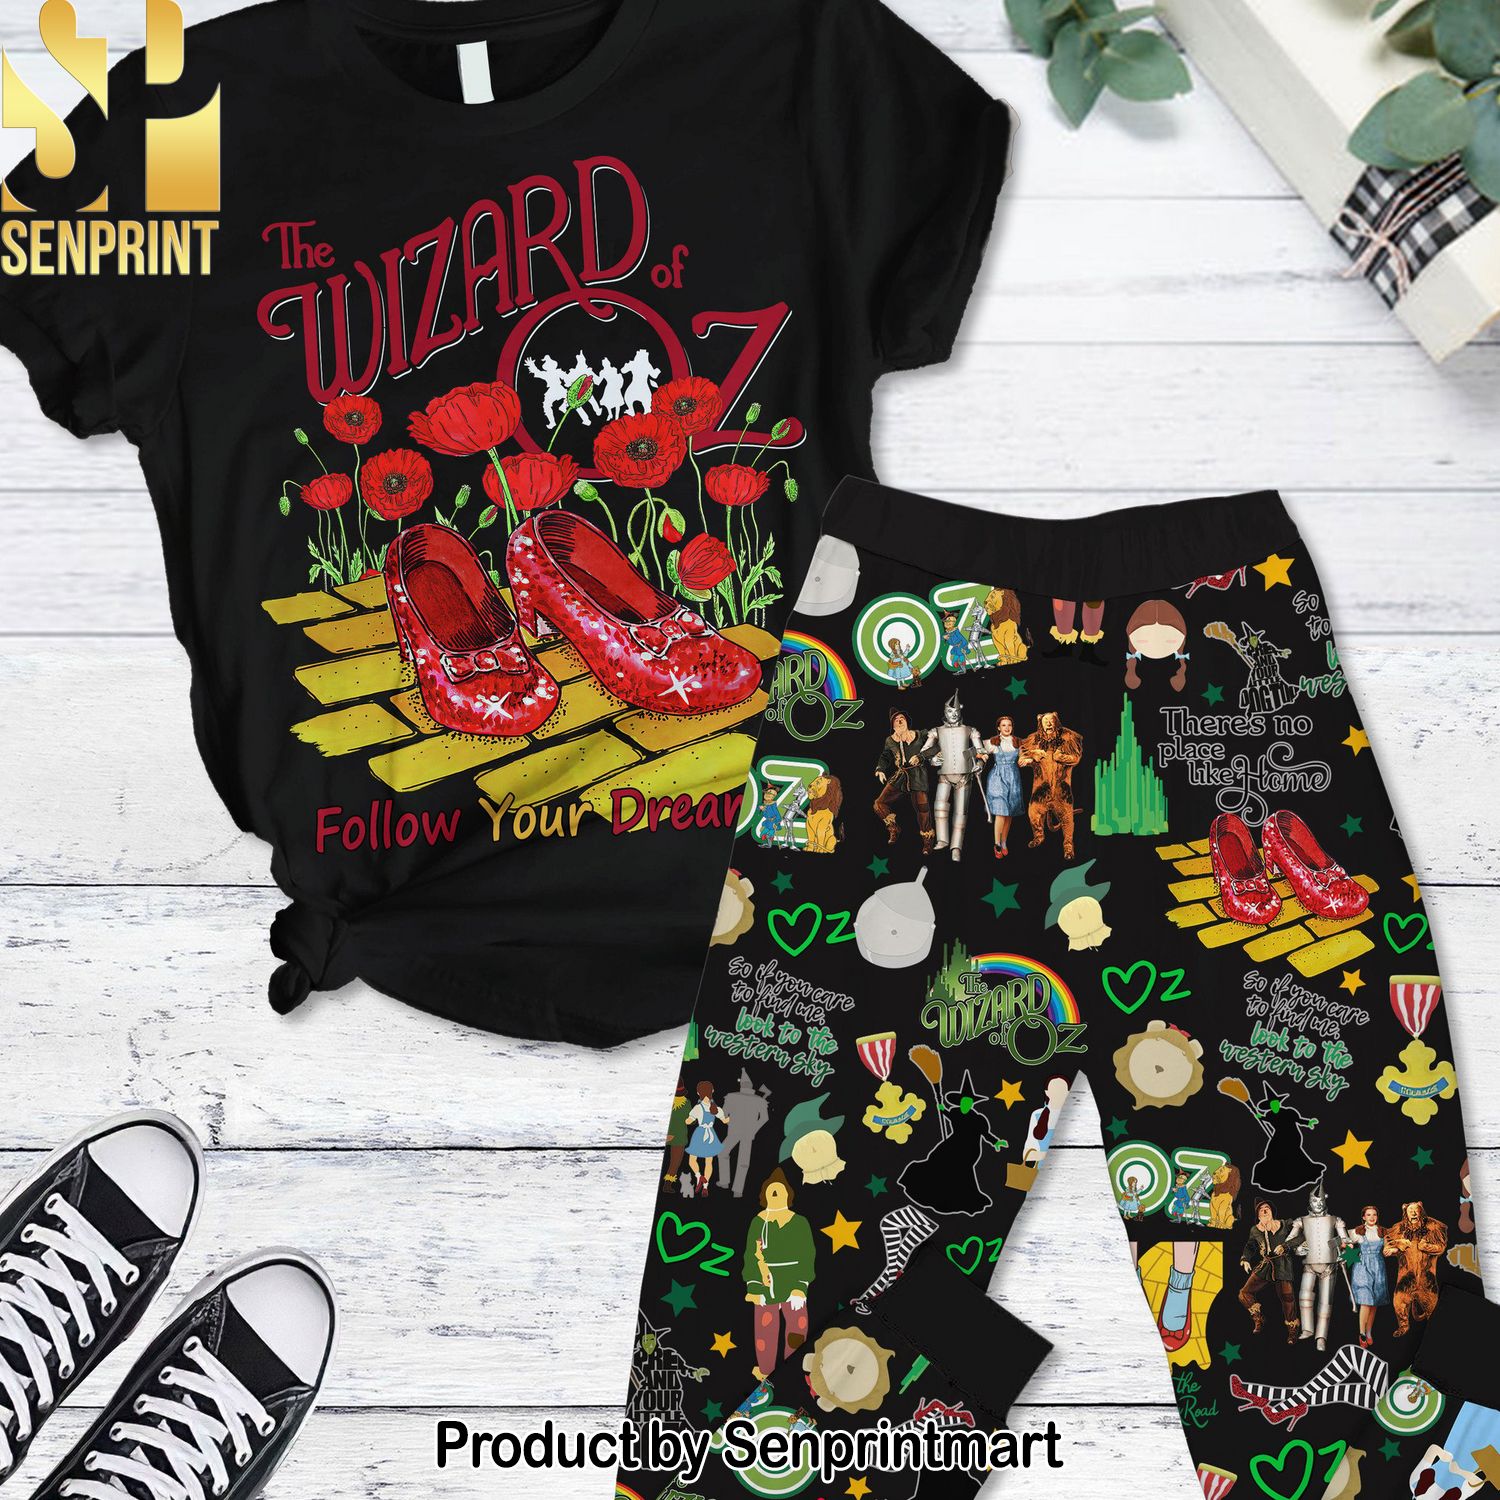 Oz the Great and Powerful Casual Full Printing Pajama Sets